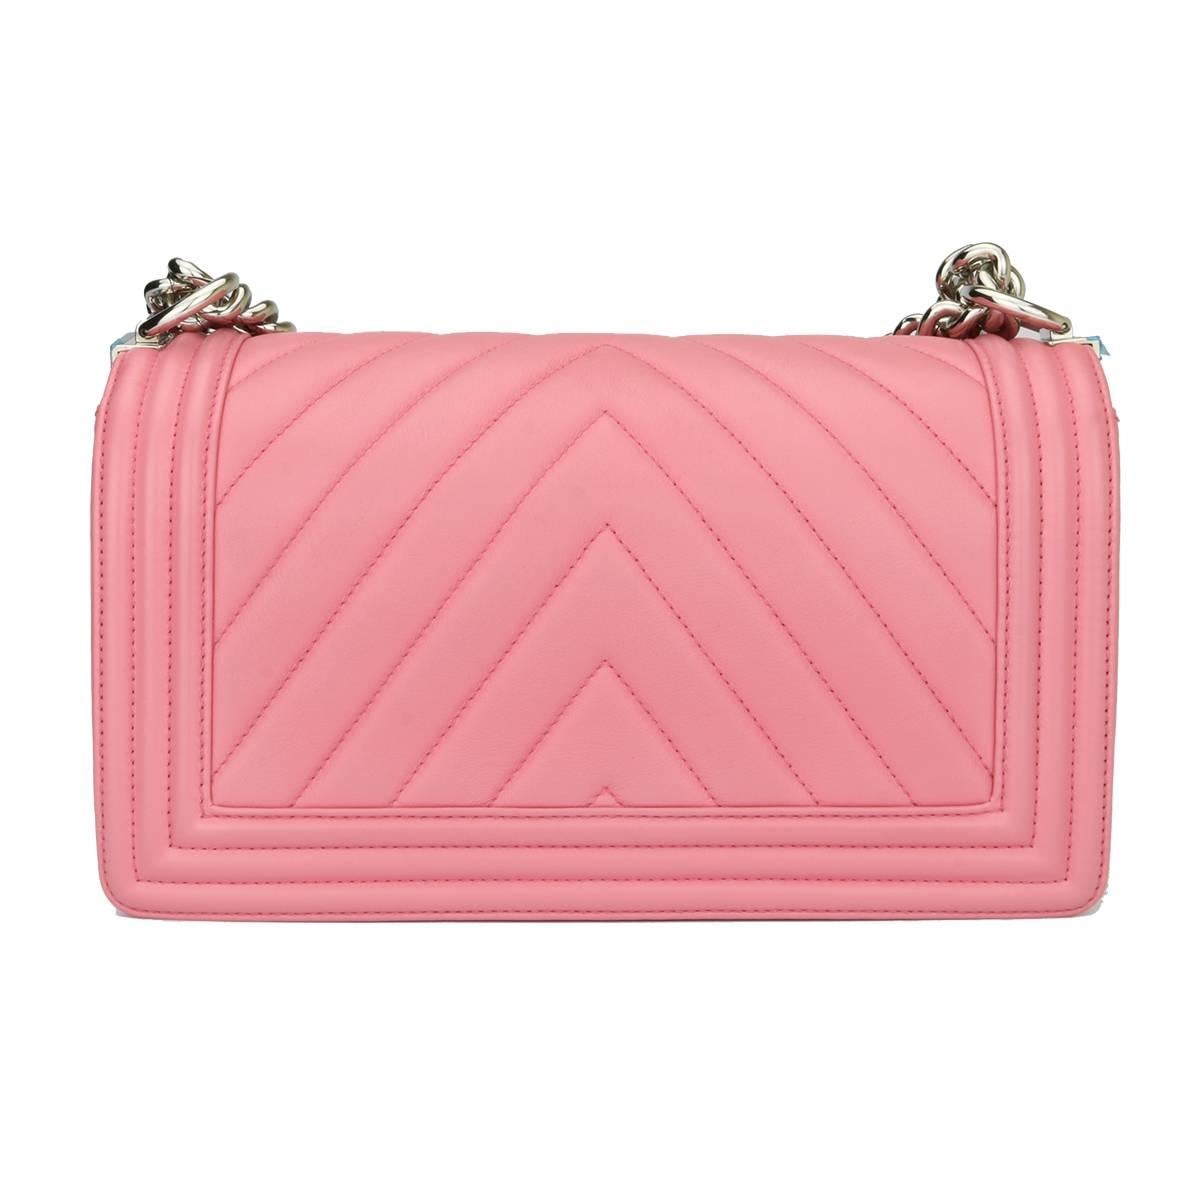 Authentic Chanel Old Medium Chevron Boy Pink Calfskin with Shiny Silver Hardware 2016.

This stunning bag is still in Mint condition, the bag still holds its original shape and the hardware is still very clean and shiny.

Exterior Condition: Mint